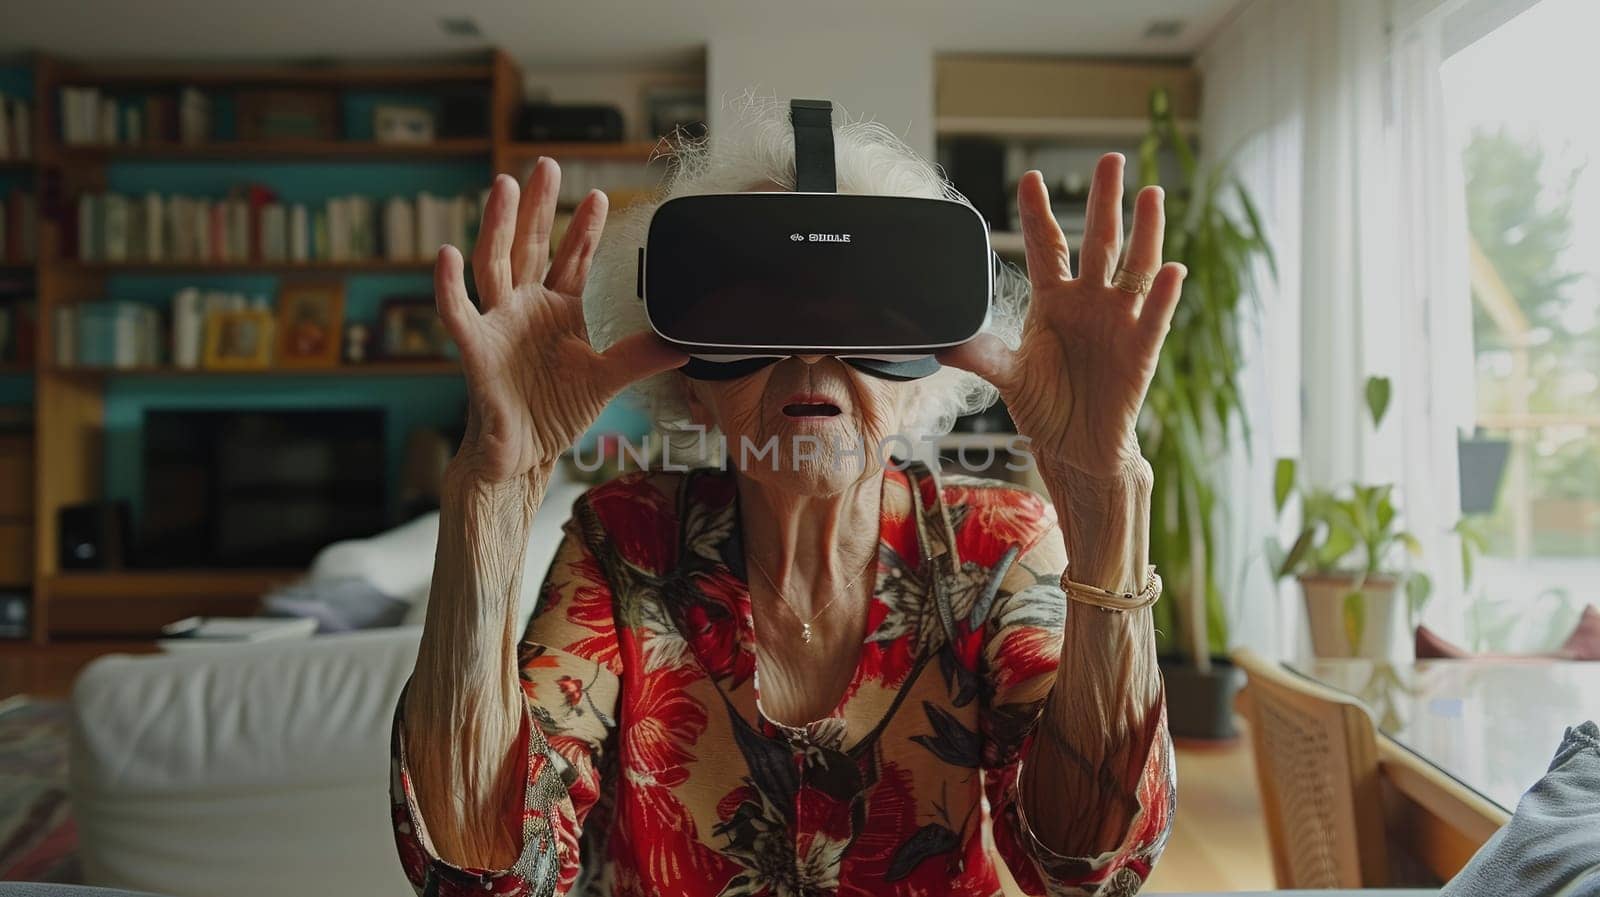 Immersed in Virtual Reality: Senior Woman Using VR Glasses in Contemporary Living Room..